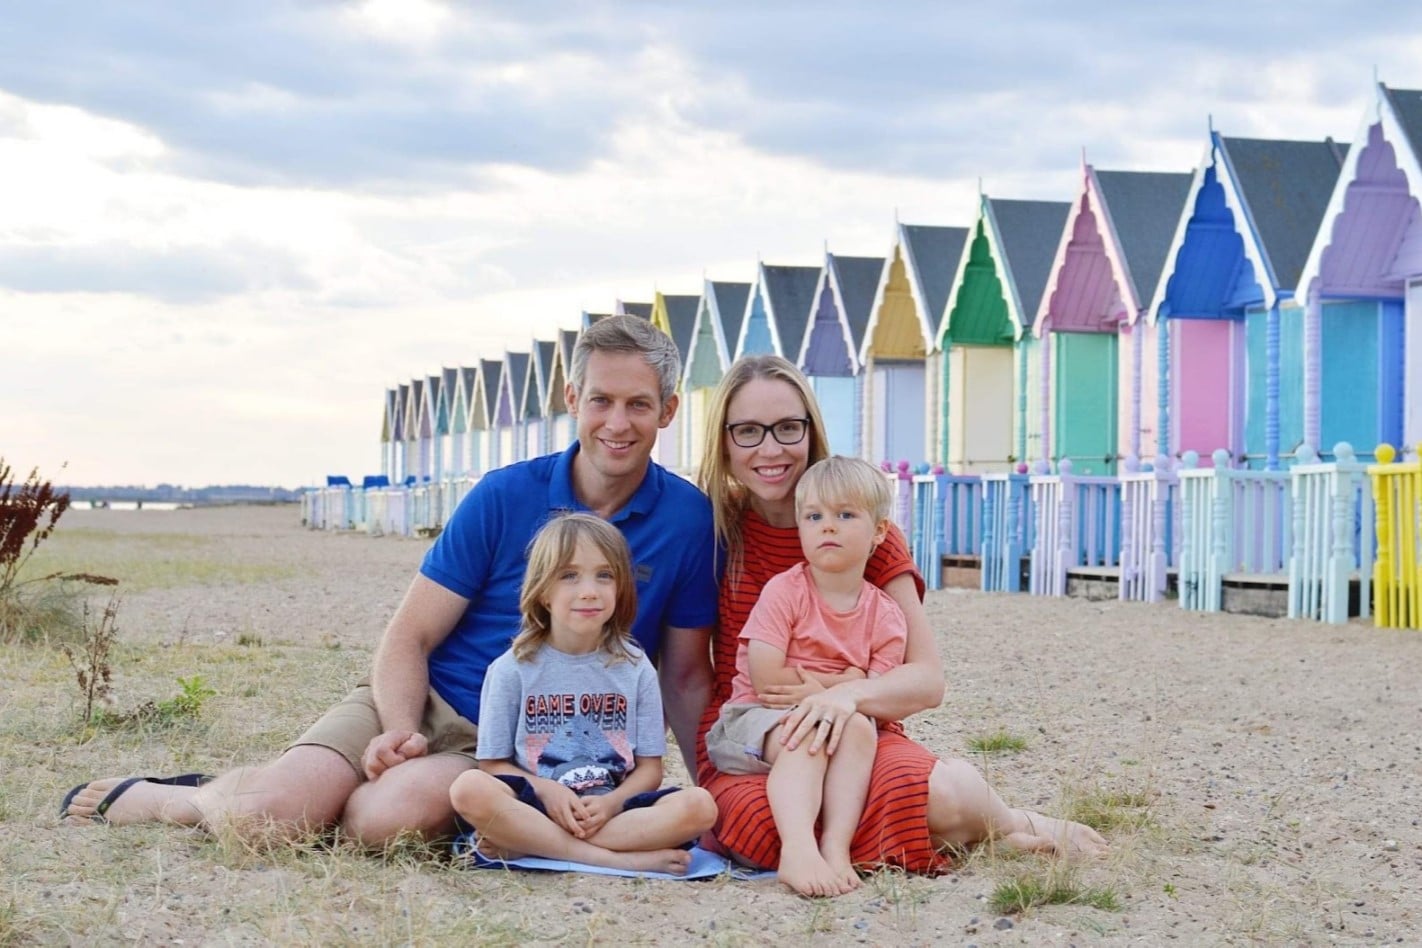 Mum, Dad and 2 children sitting on a beach in front of beach huts